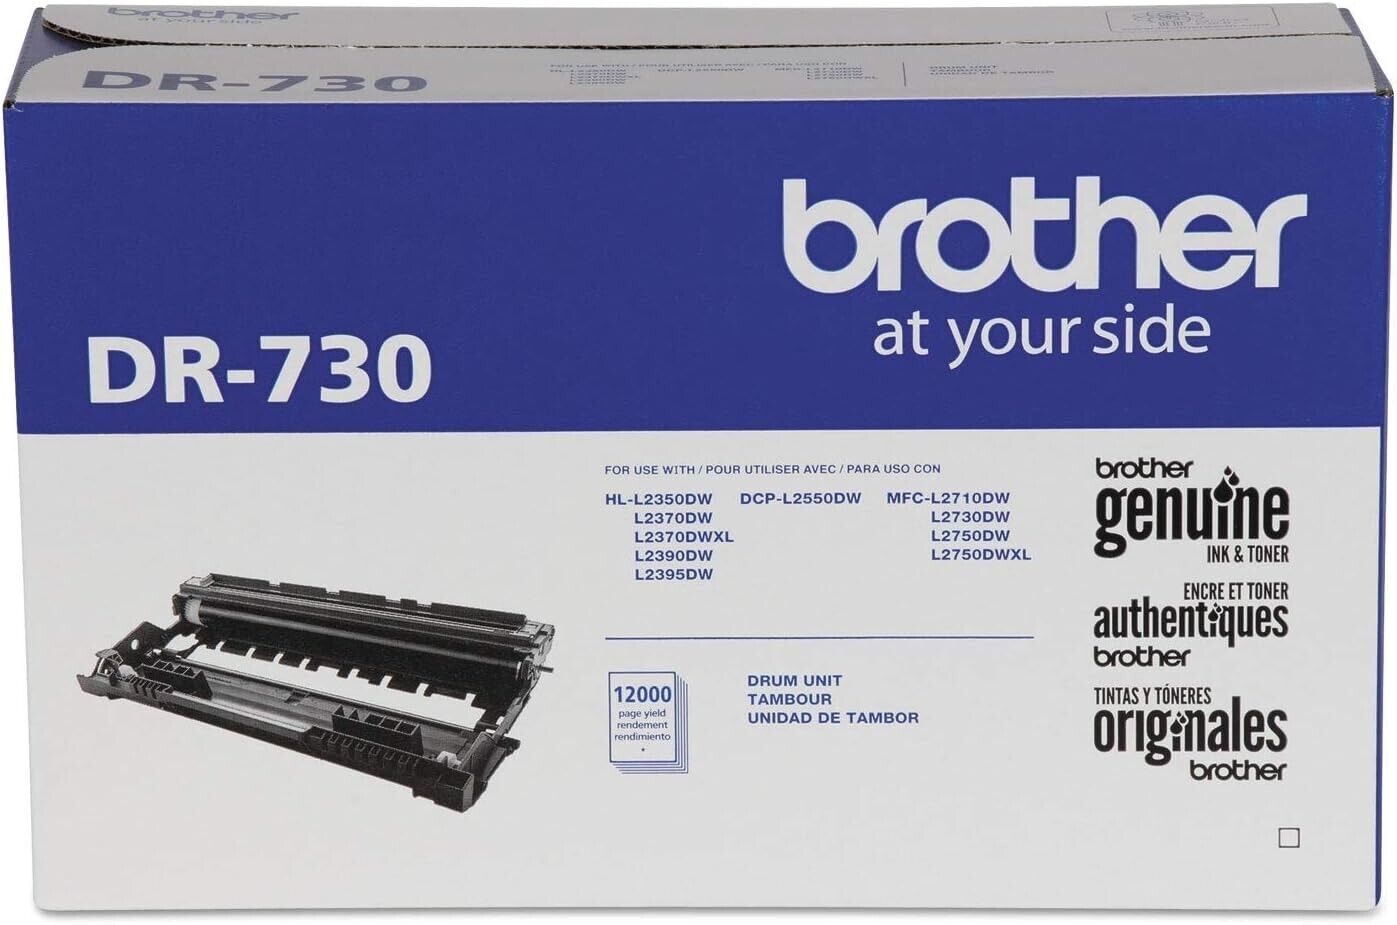 Brother Genuine DR730 Drum Unit Up To 12,000 Page Yield *OPEN BOX* DESCRIPTION*